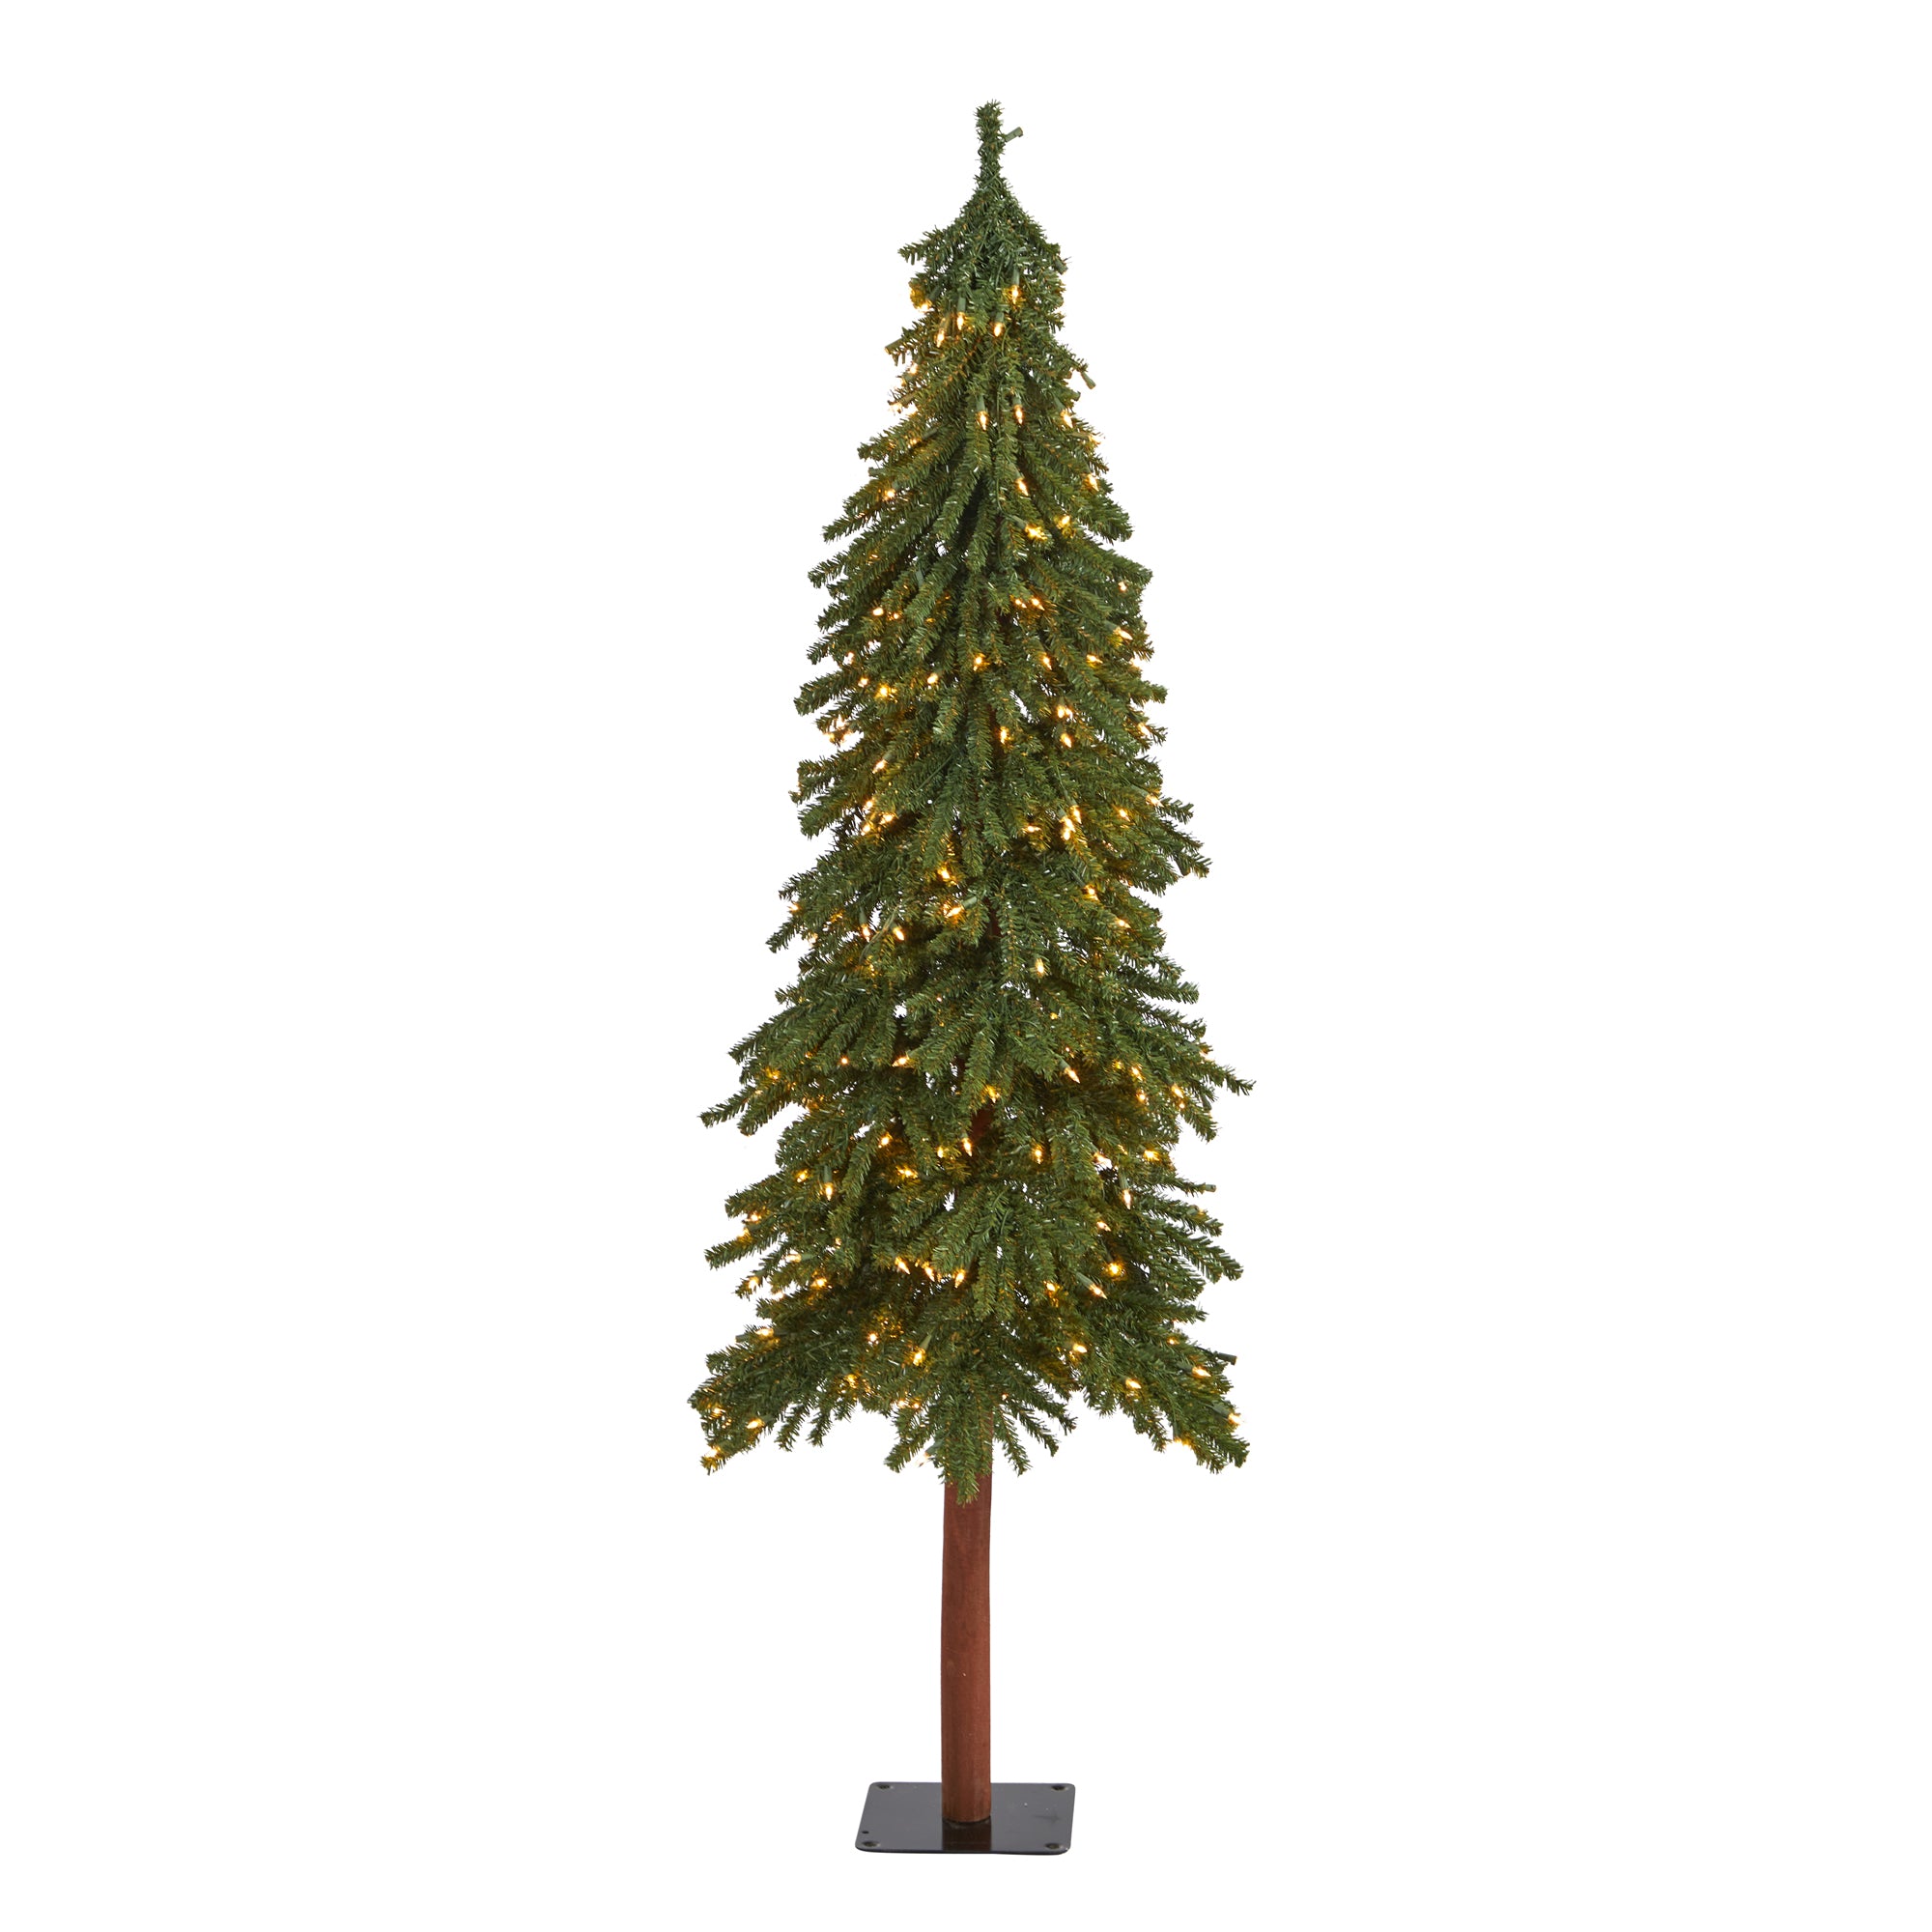 6' Grand Alpine Artificial Christmas Tree with 300 Clear Lights and 601 Bendable Branches on Natural Trunk